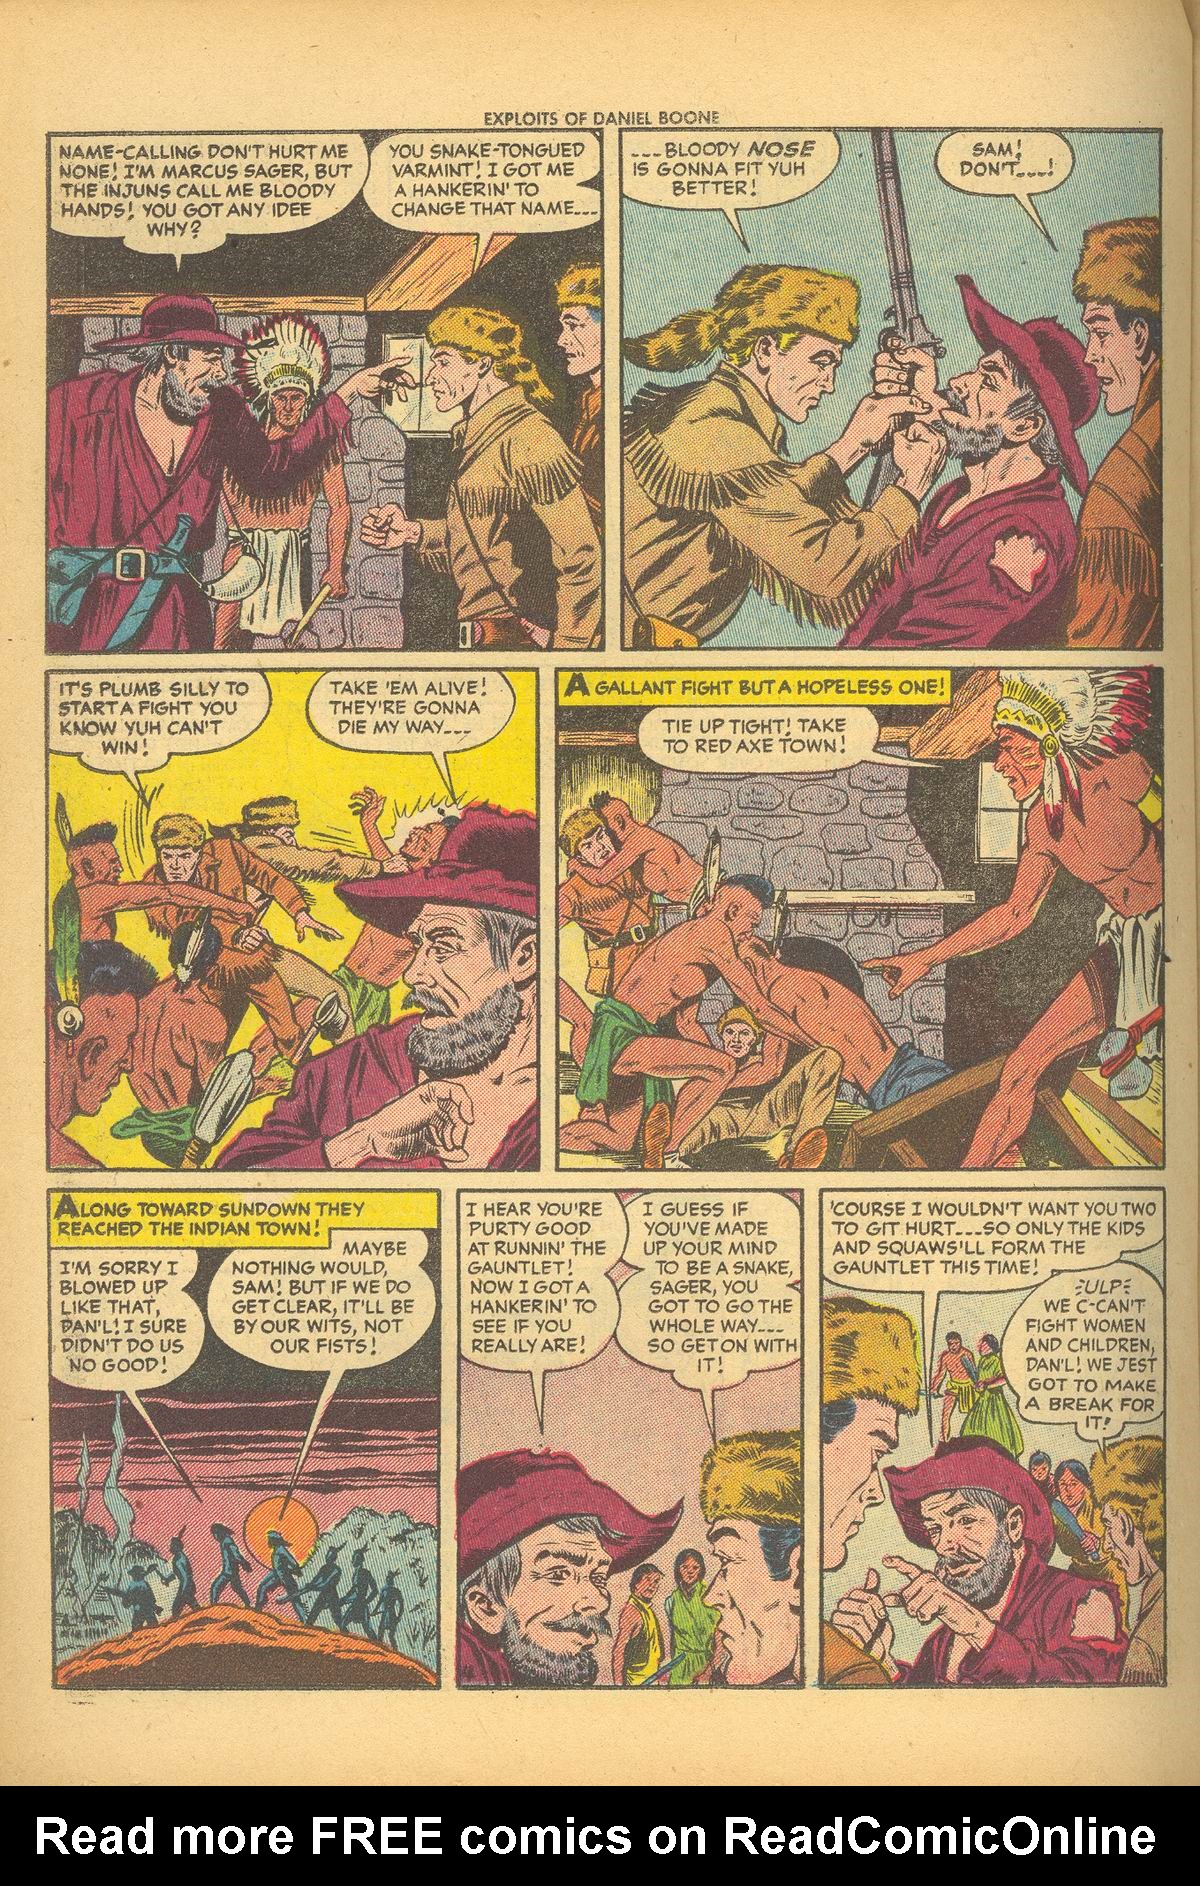 Read online Exploits of Daniel Boone comic -  Issue #2 - 22